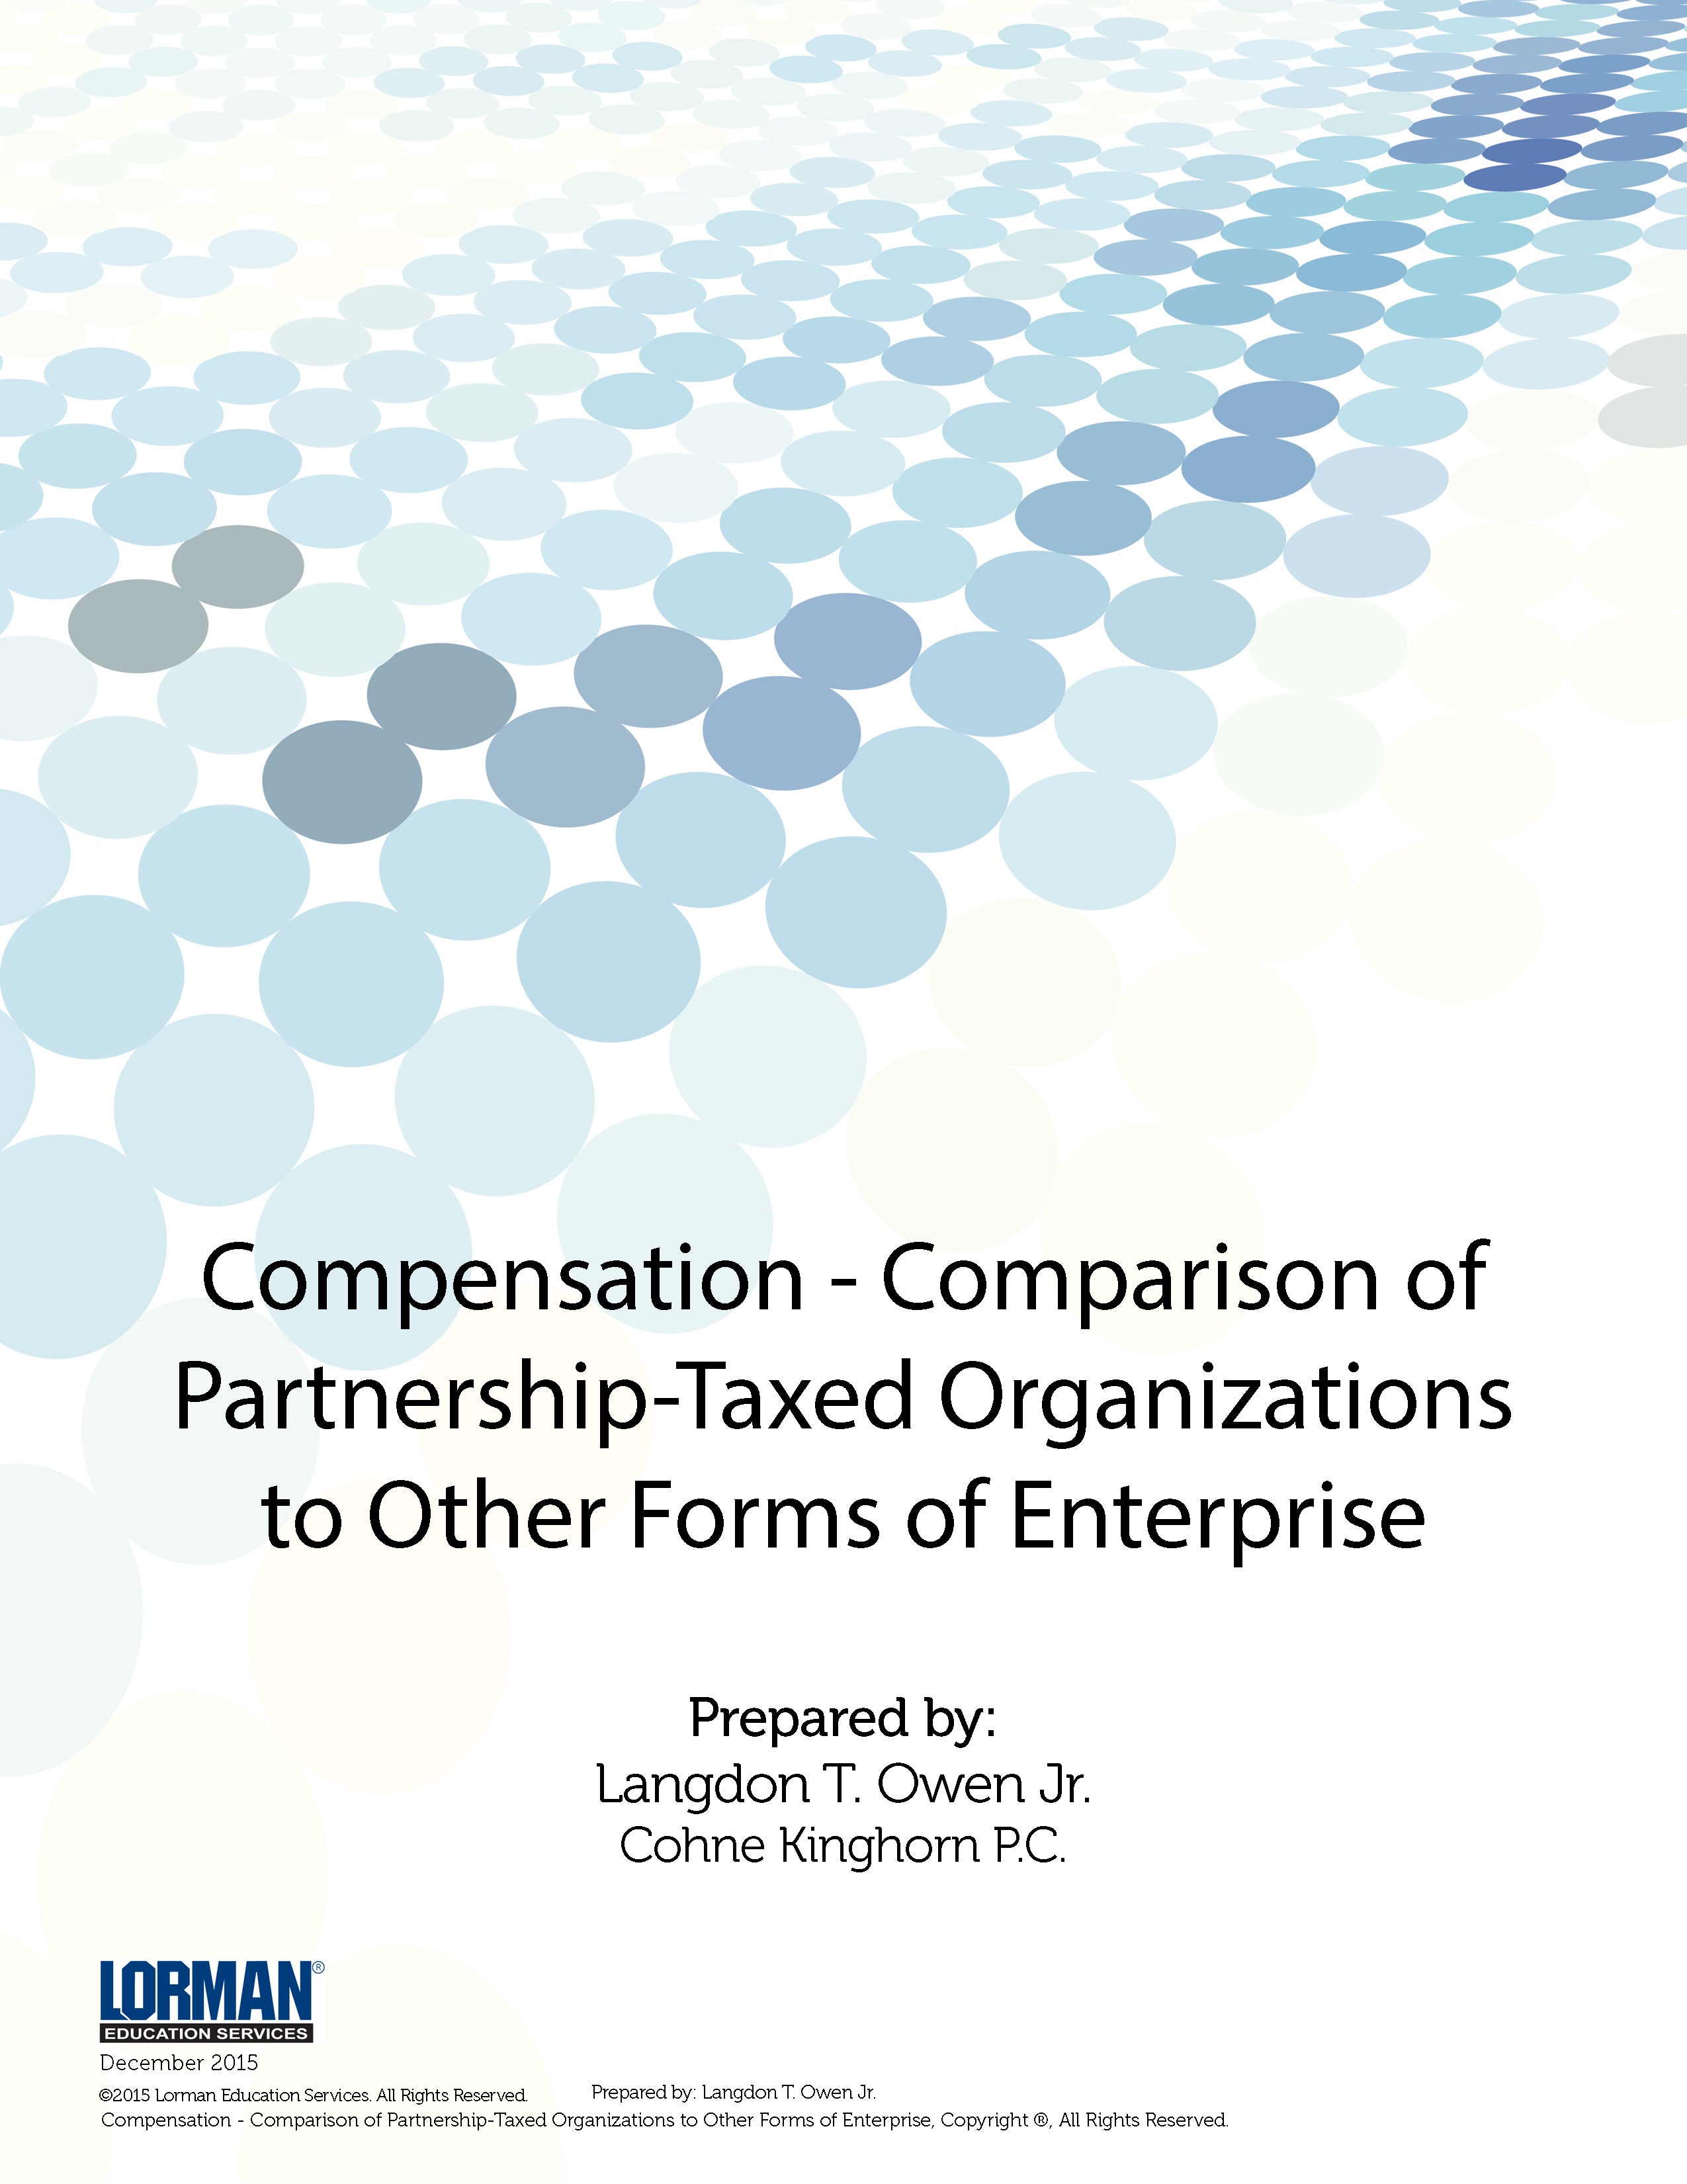 Compensation - Comparison of Partnership-Taxed Organizations to Other Forms of Enterprise